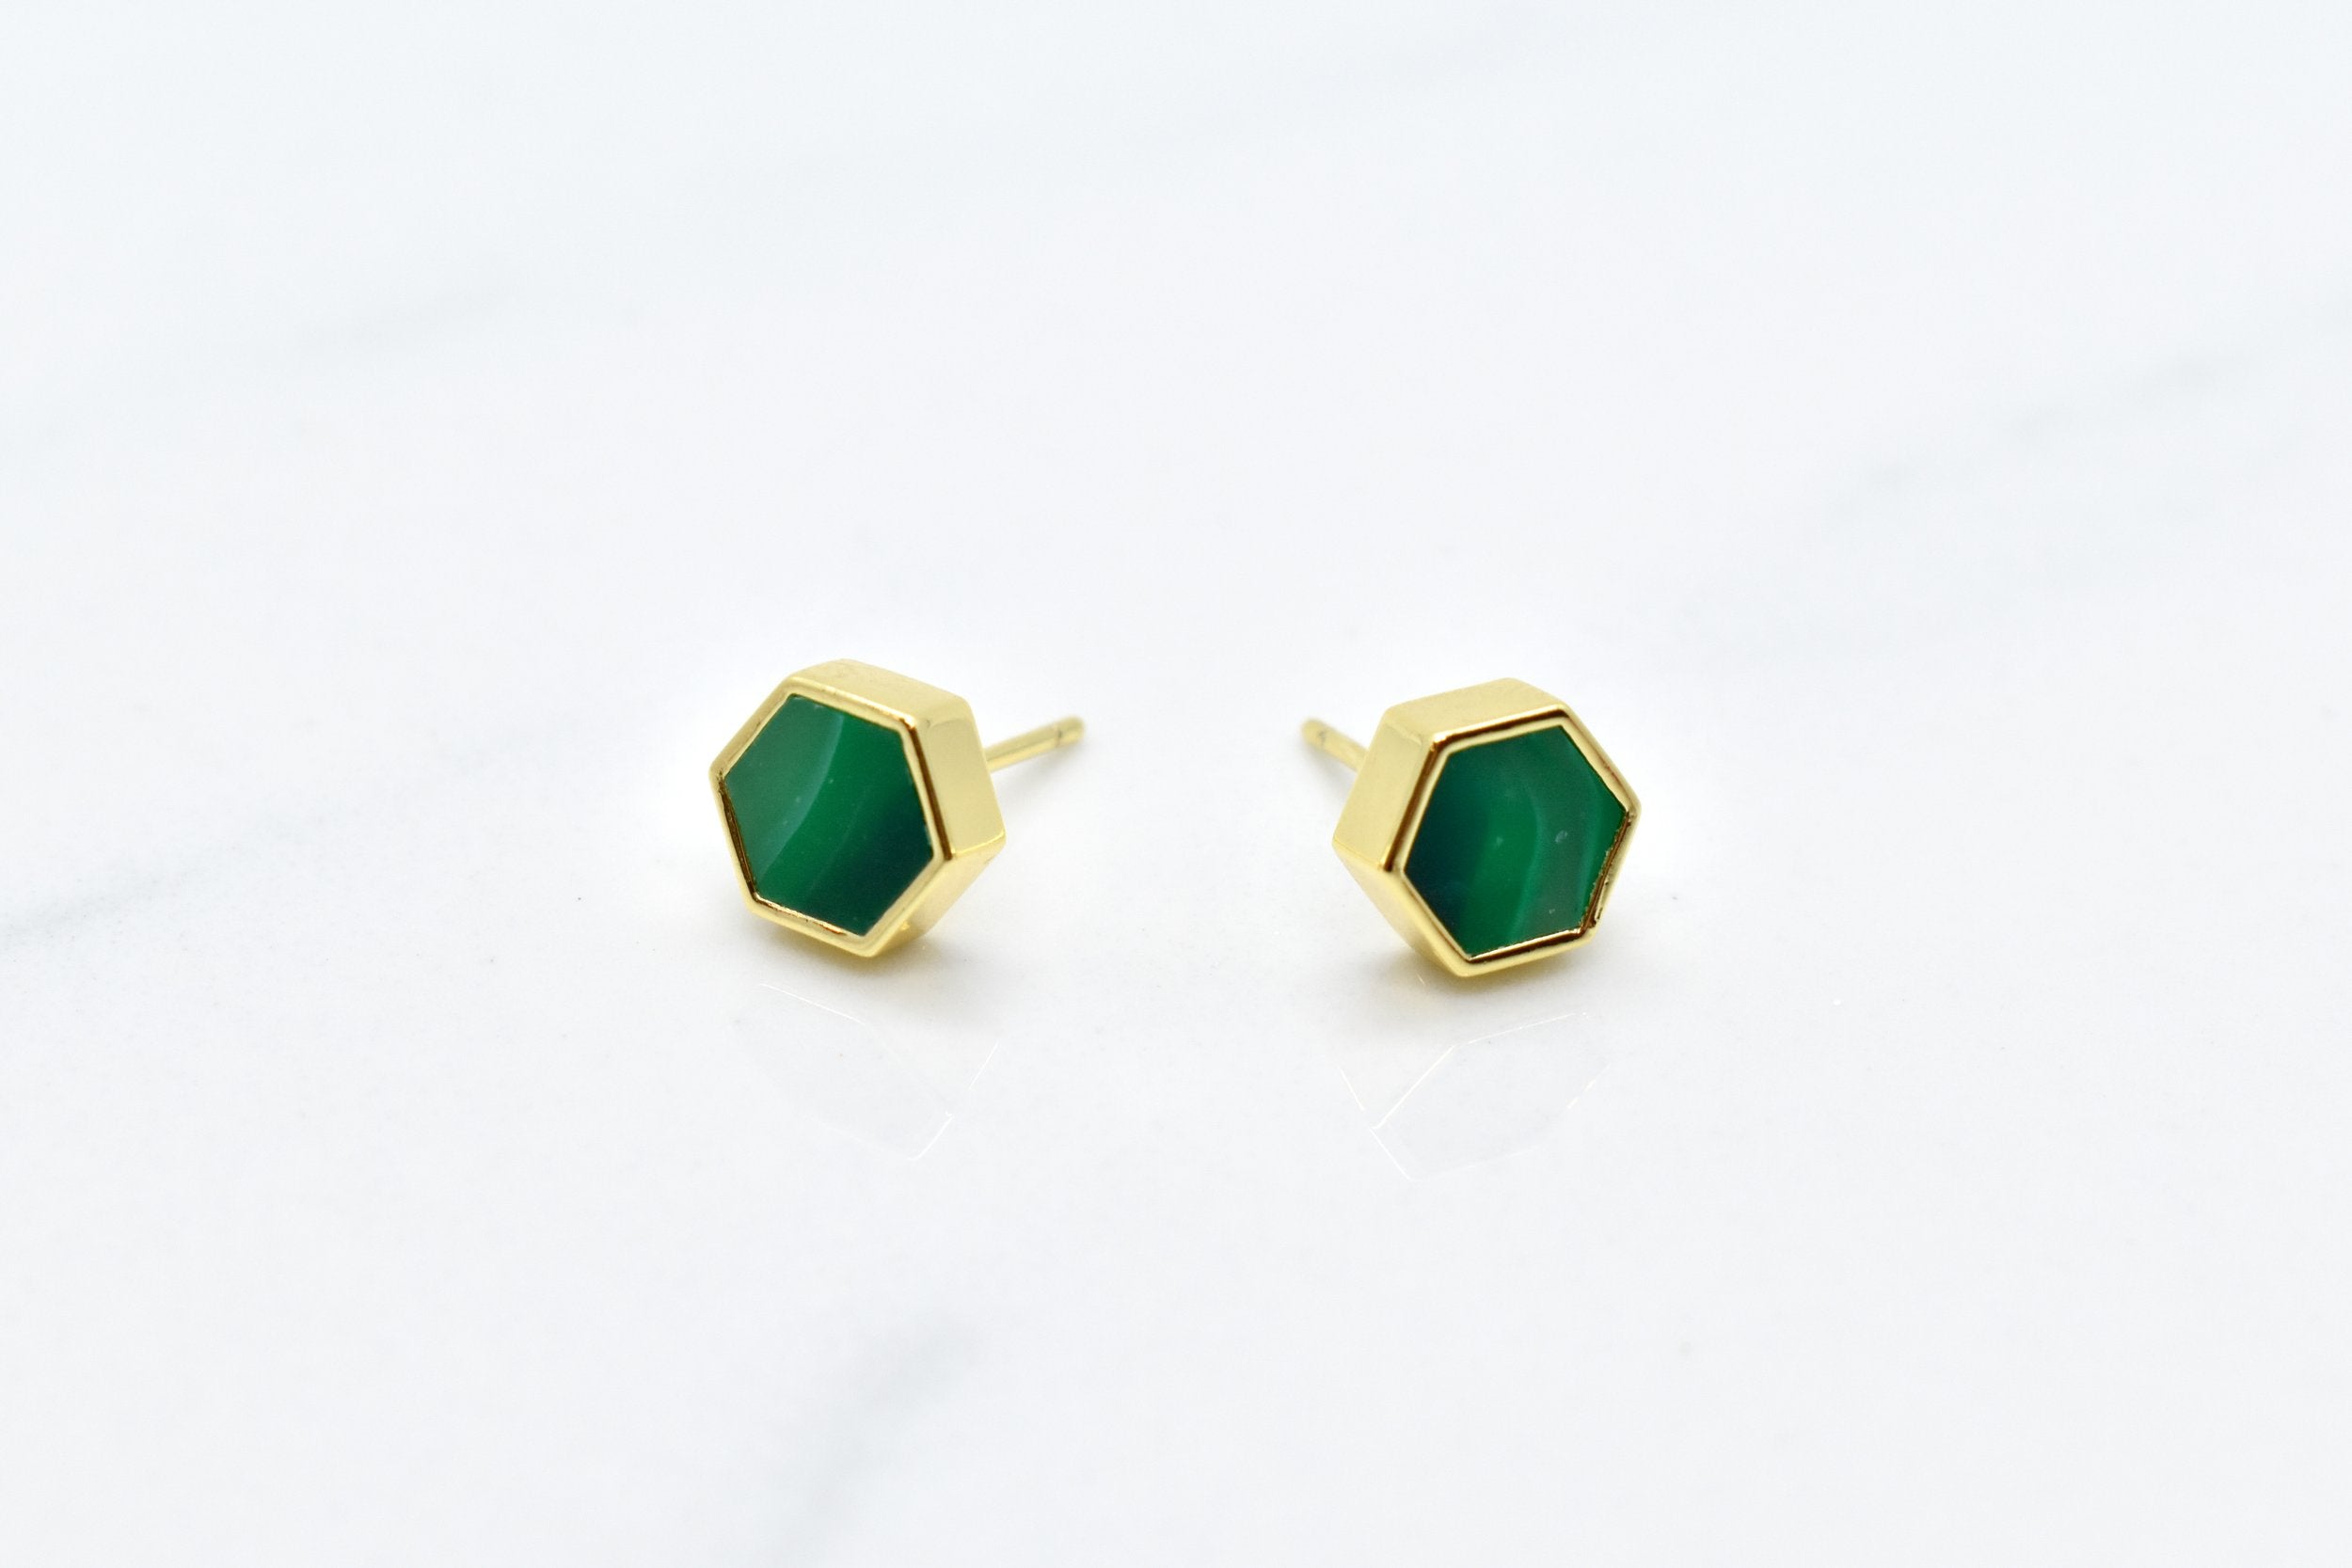 green and gold hexagon stud earring set with swirling emerald texture and 14k gold hexagon shape against a white background